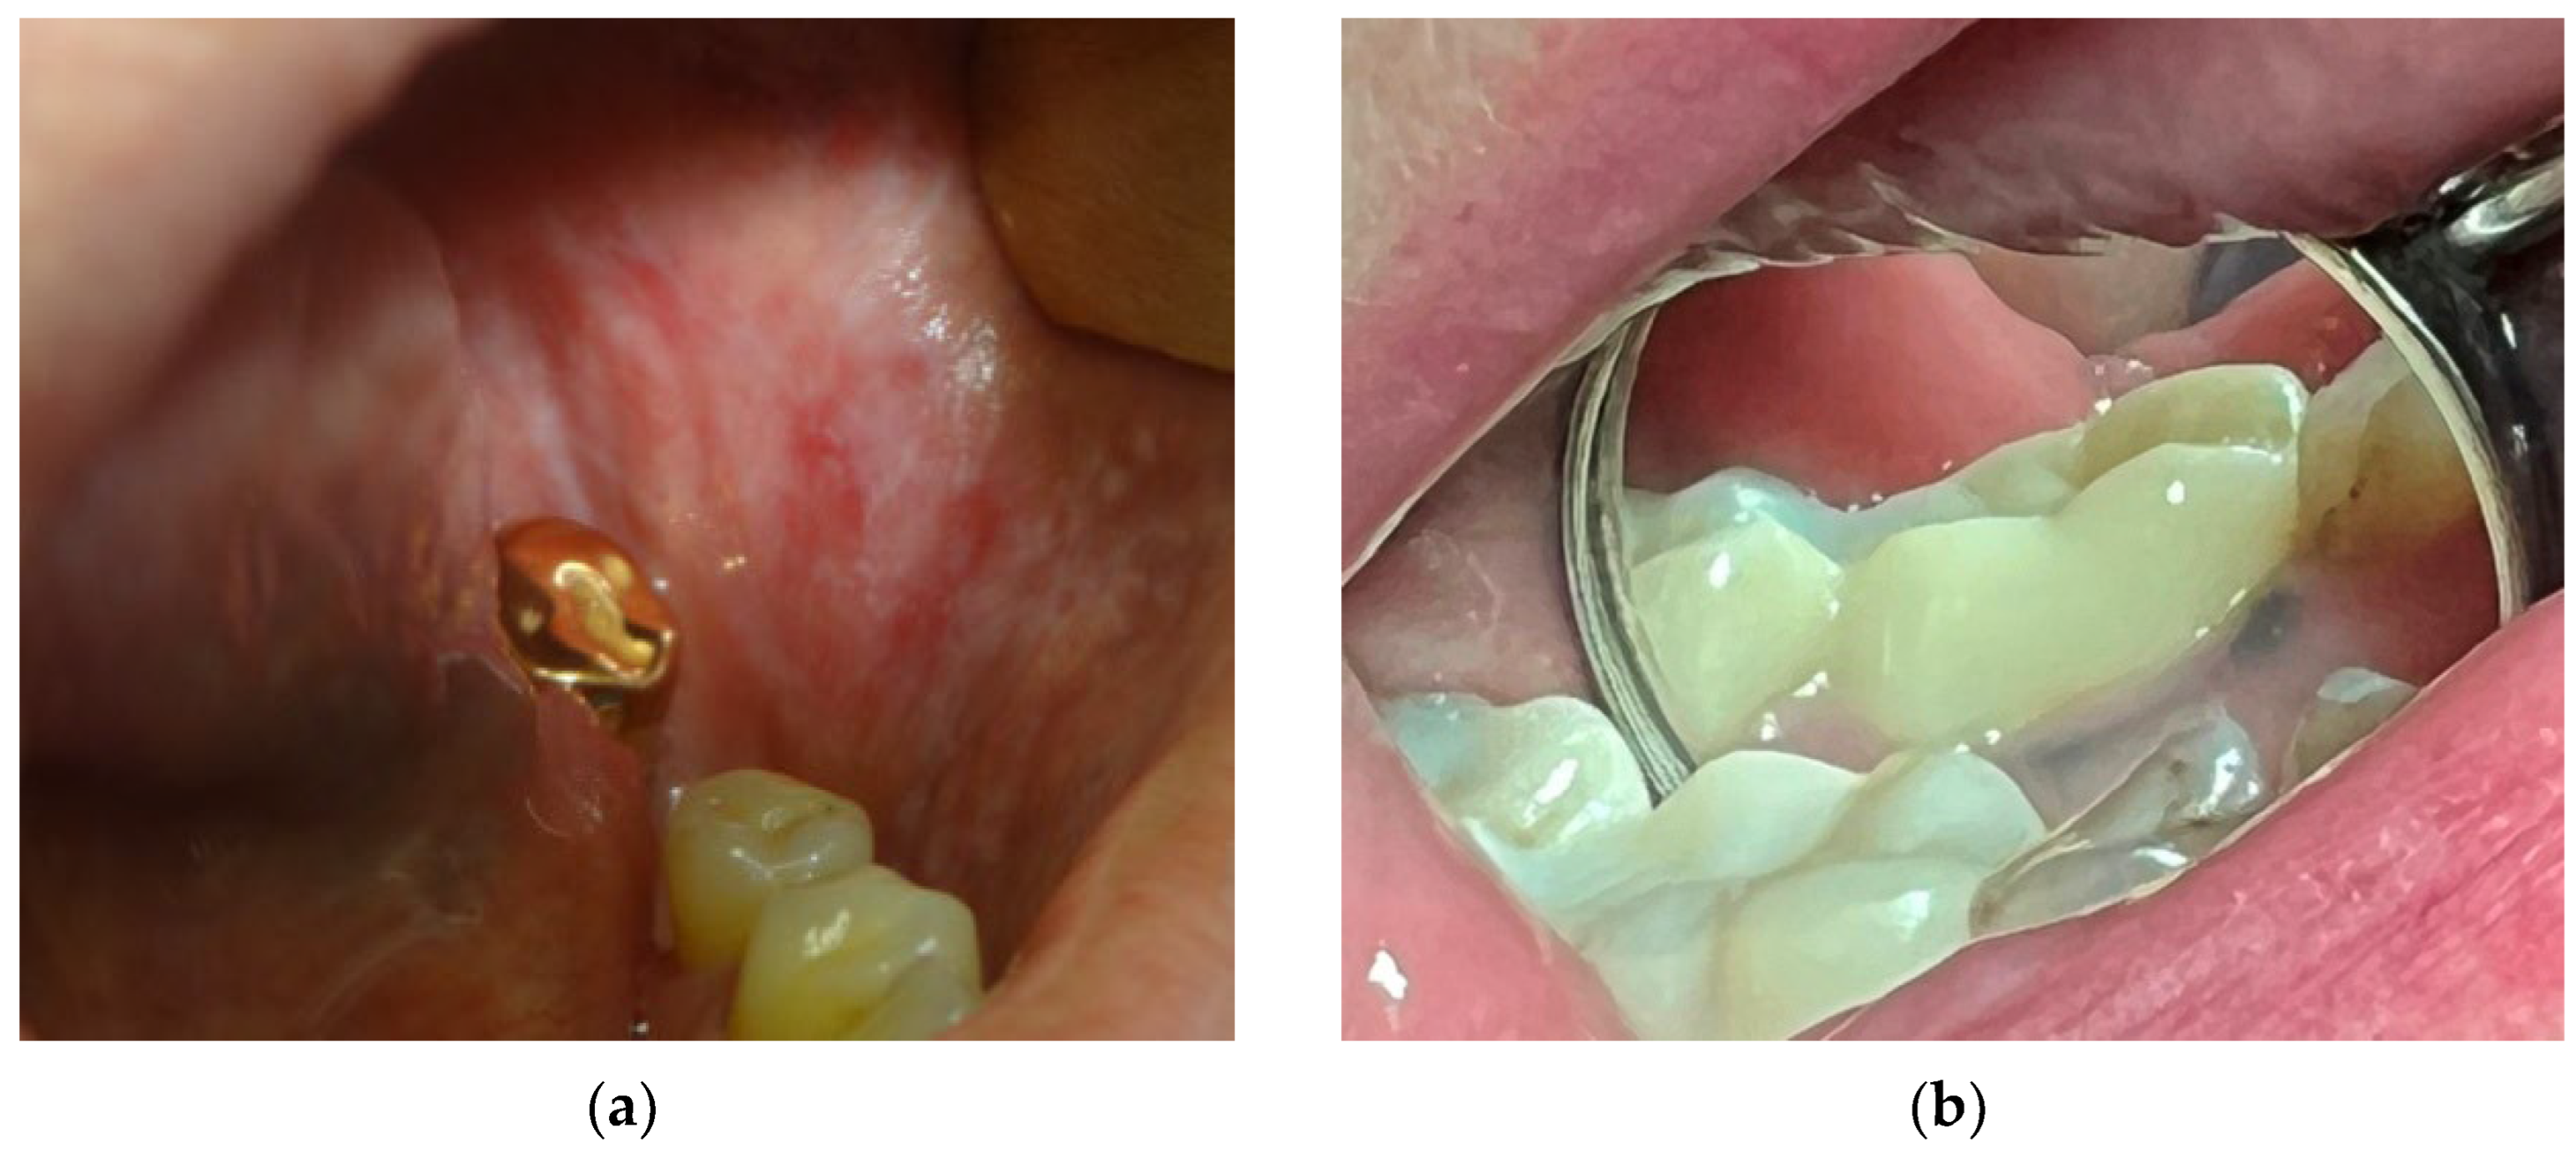 An Overview of Amalgam Tattoos for the Dental Hygienist - Today's RDH